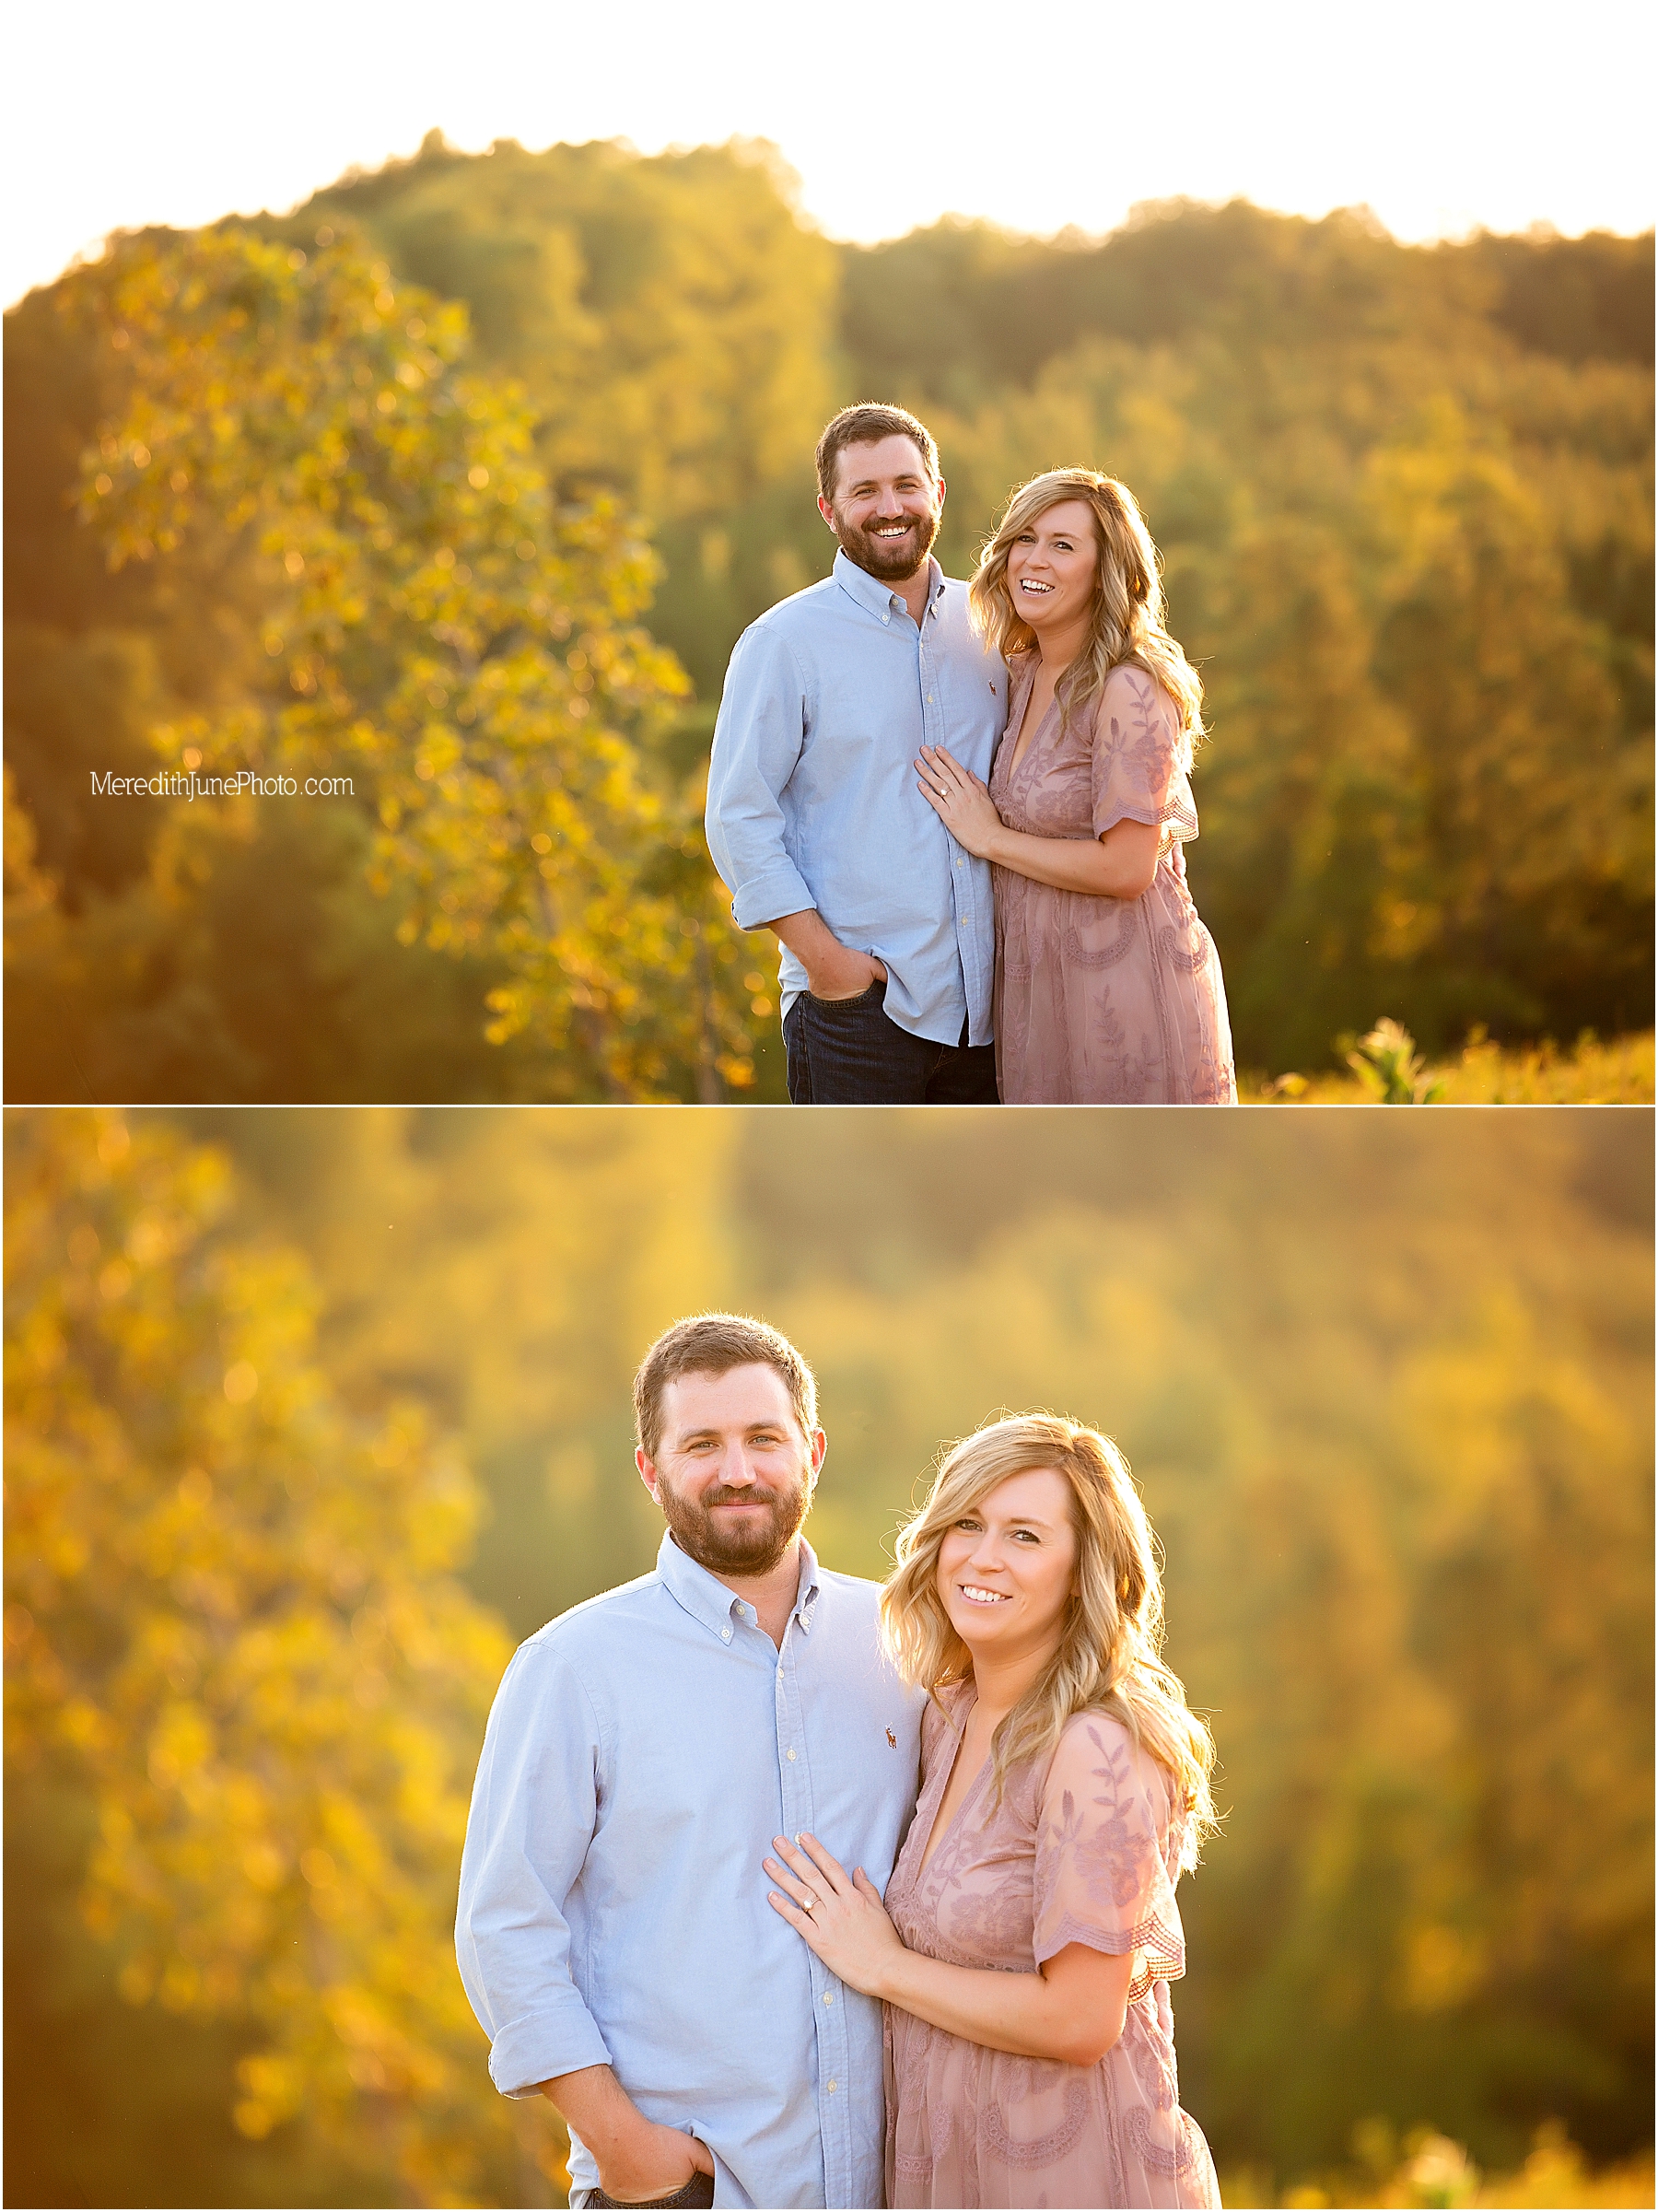 Beautiful outdoor fall family pictures 